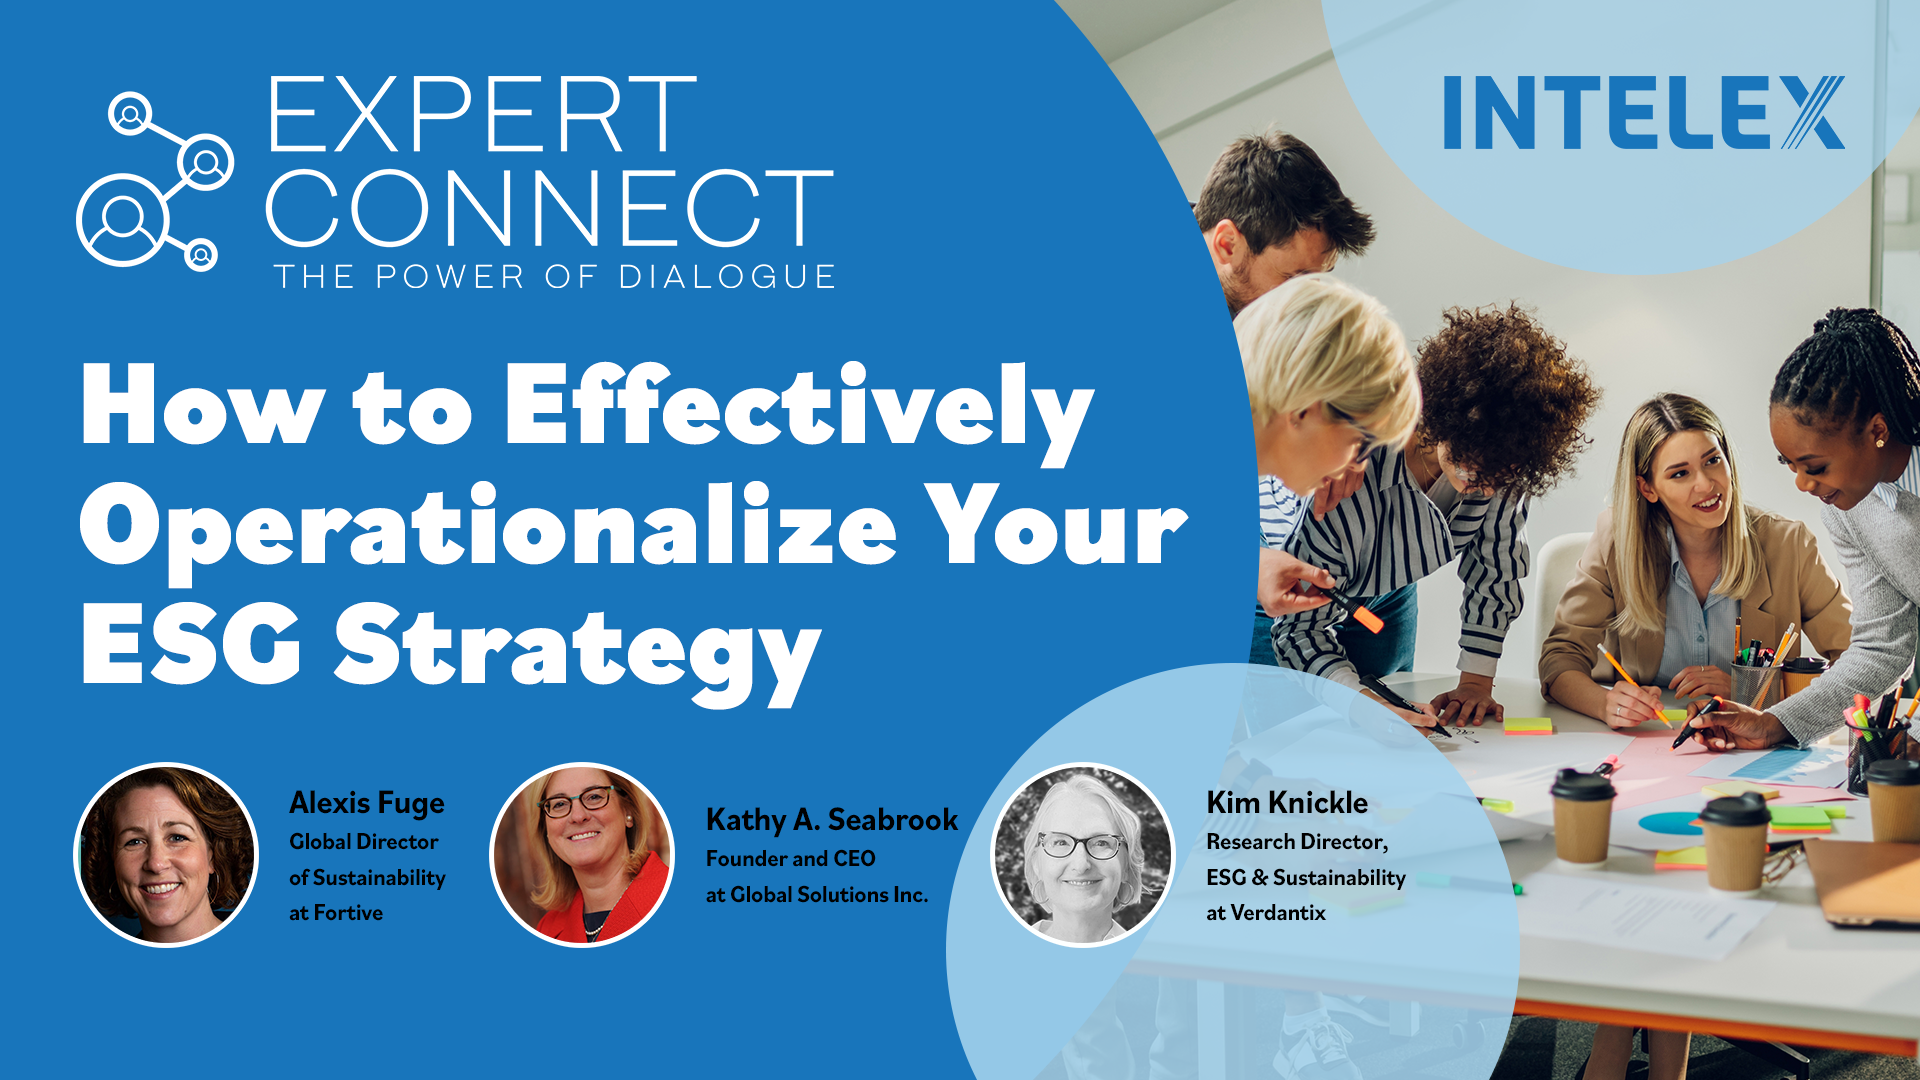 Expert Connect – How to Effectively Operationalize Your ESG Strategy